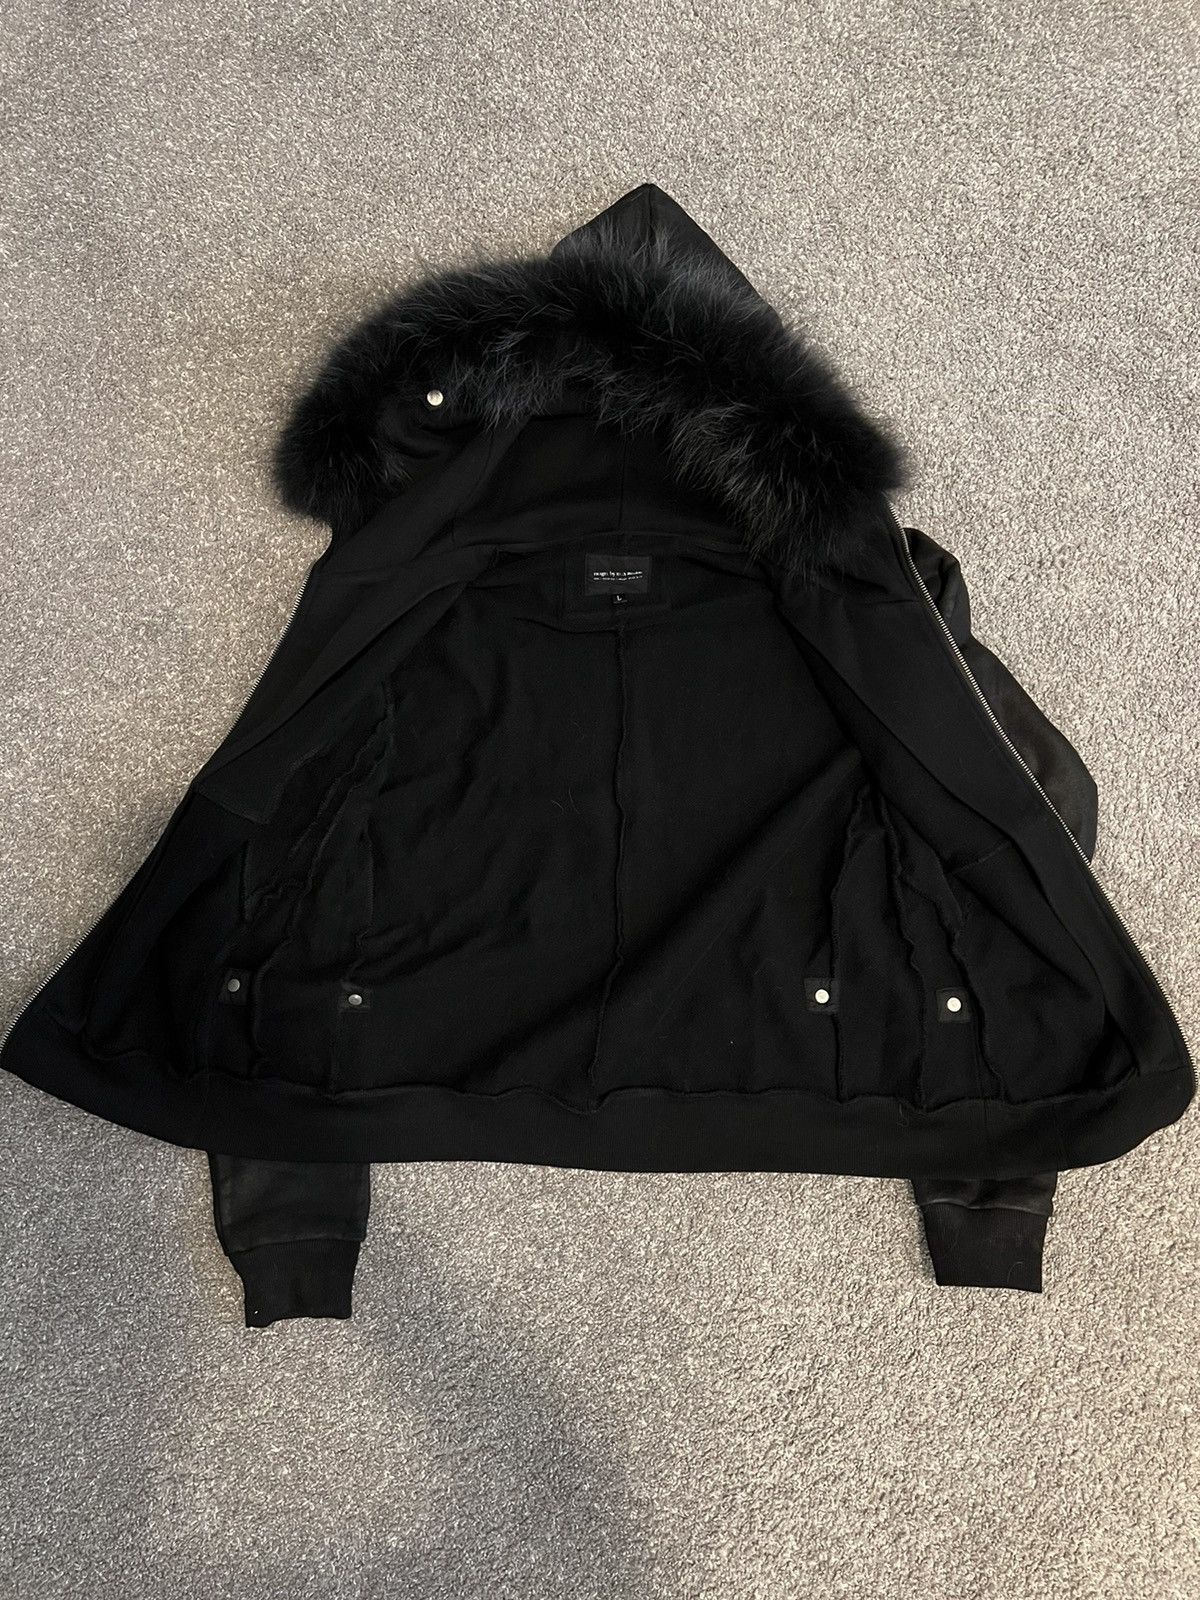 Archival Clothing Ranger Cartel 1000YRS Waxed Zip-Up Hoodie | Grailed